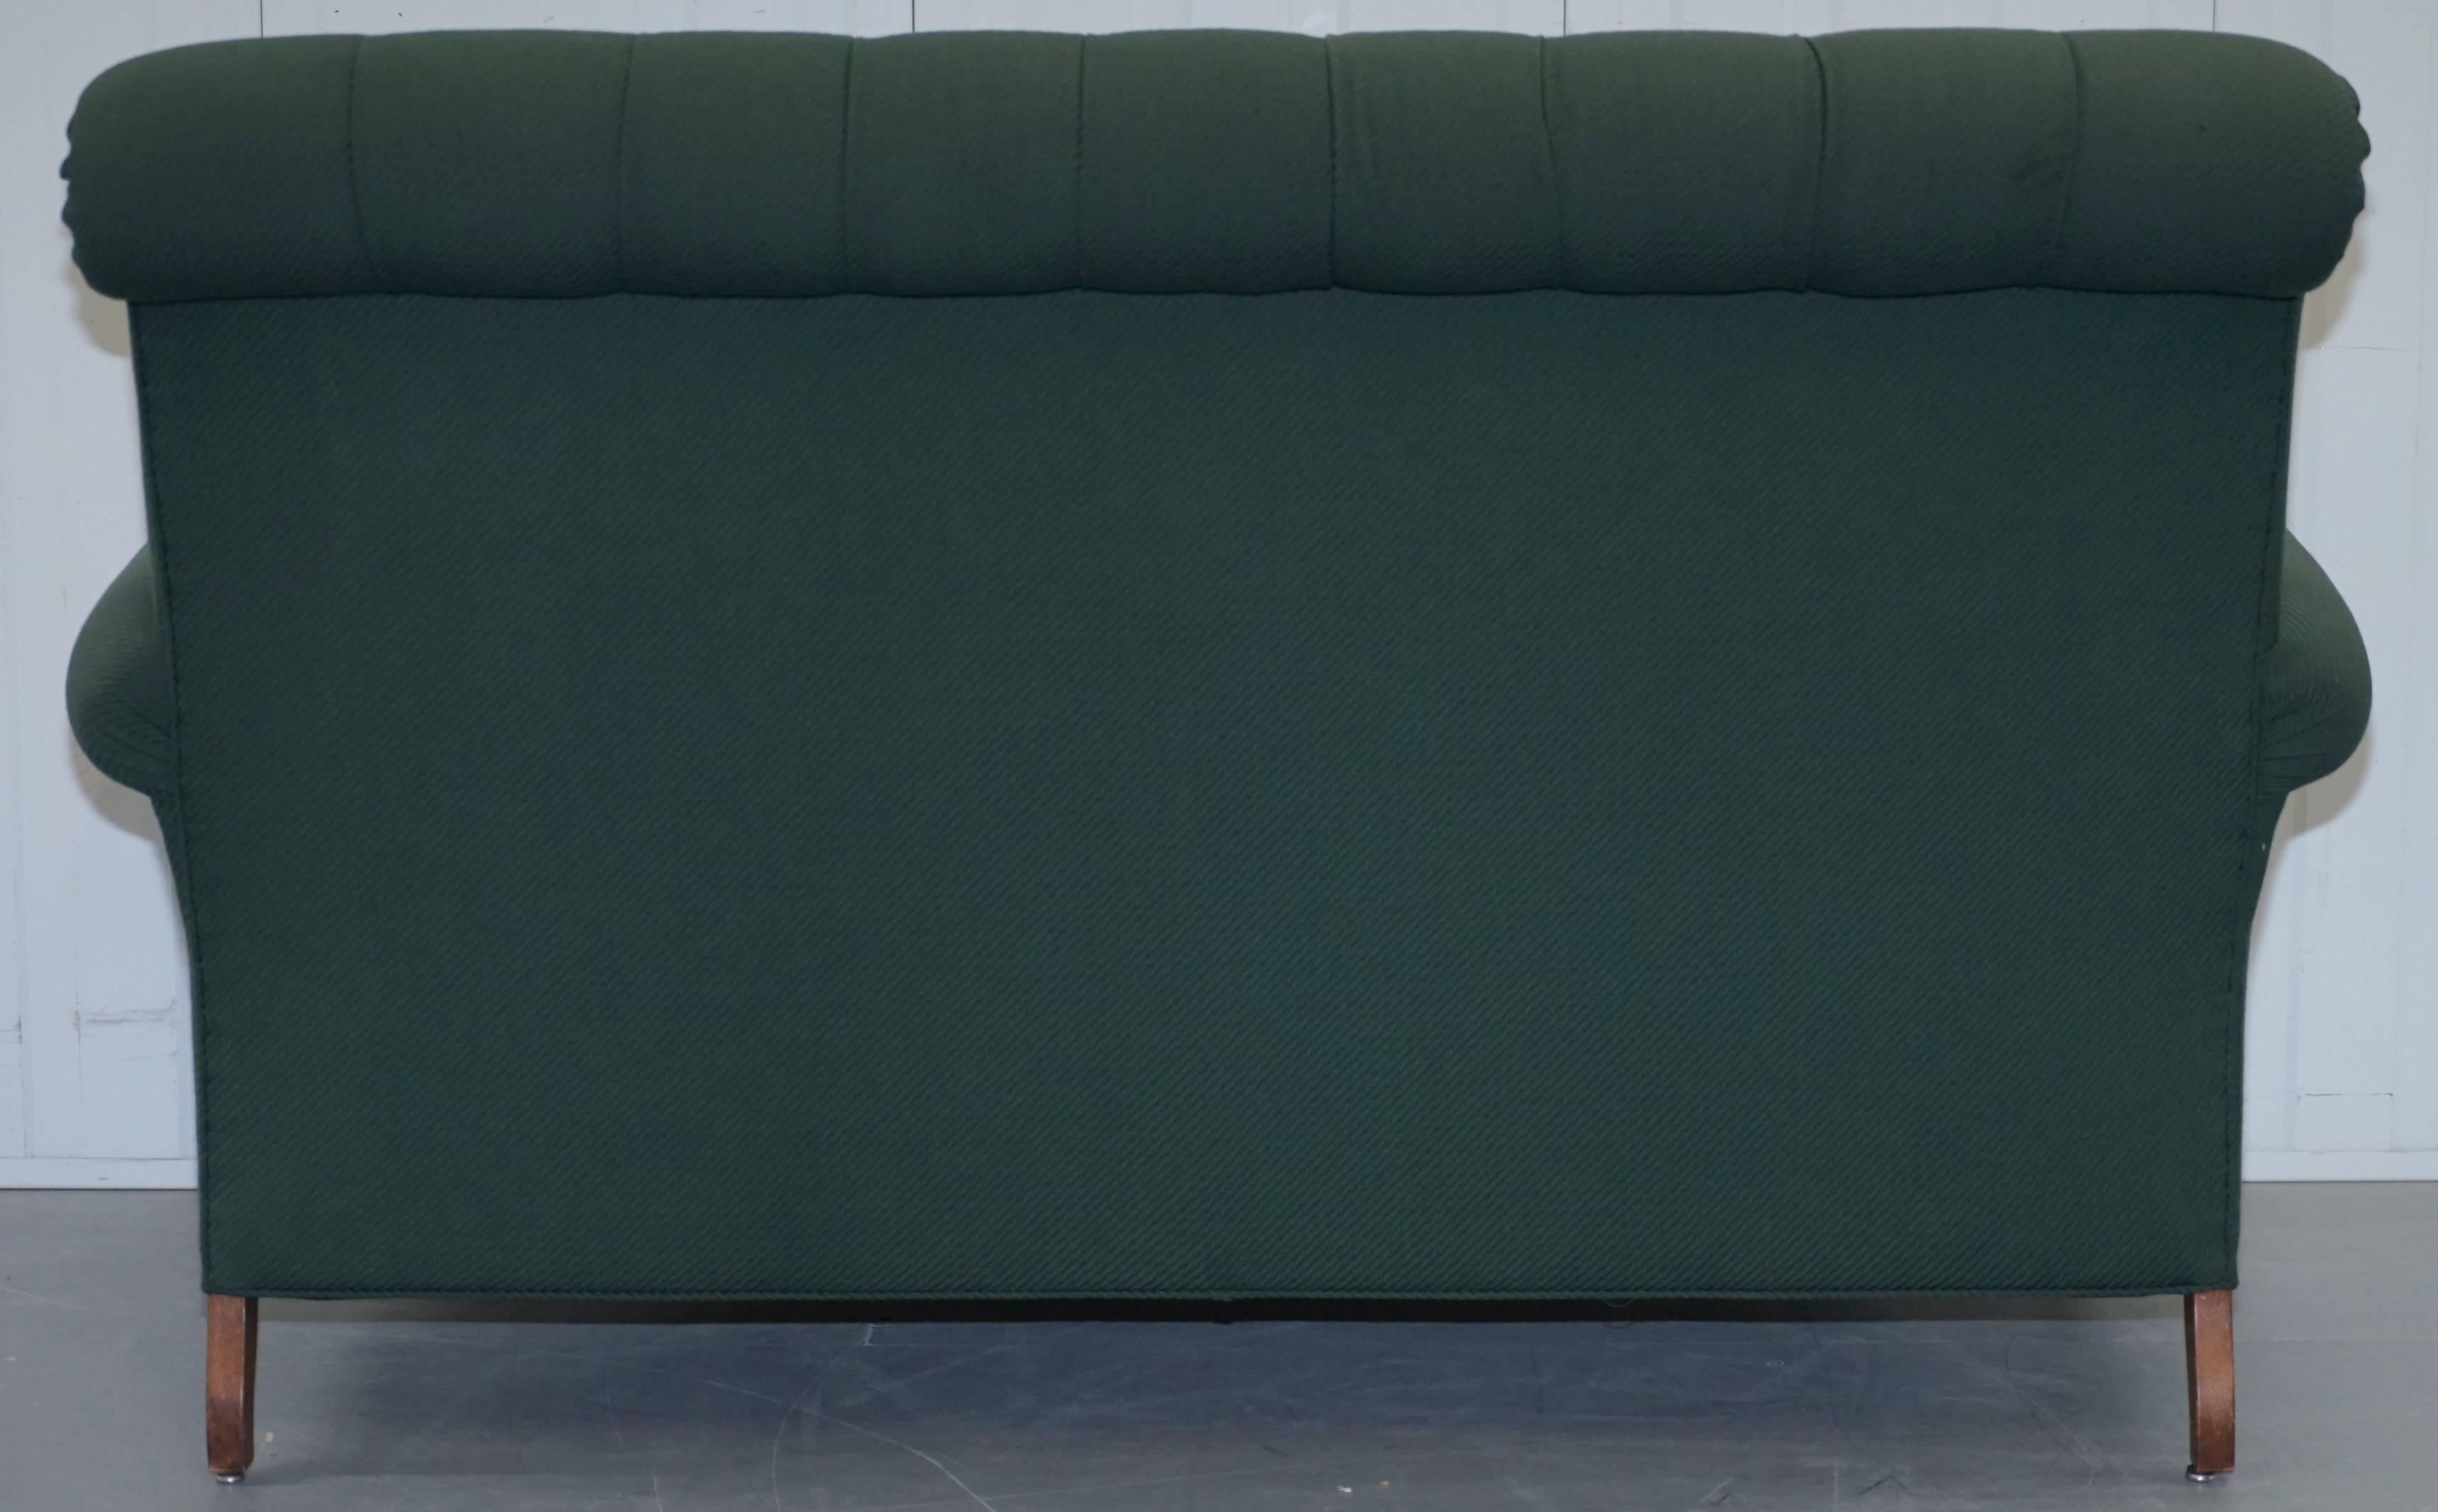 Wellington Model Howard Style Chesterfield Green Upholstery Two-Seat Bench Sofa 9